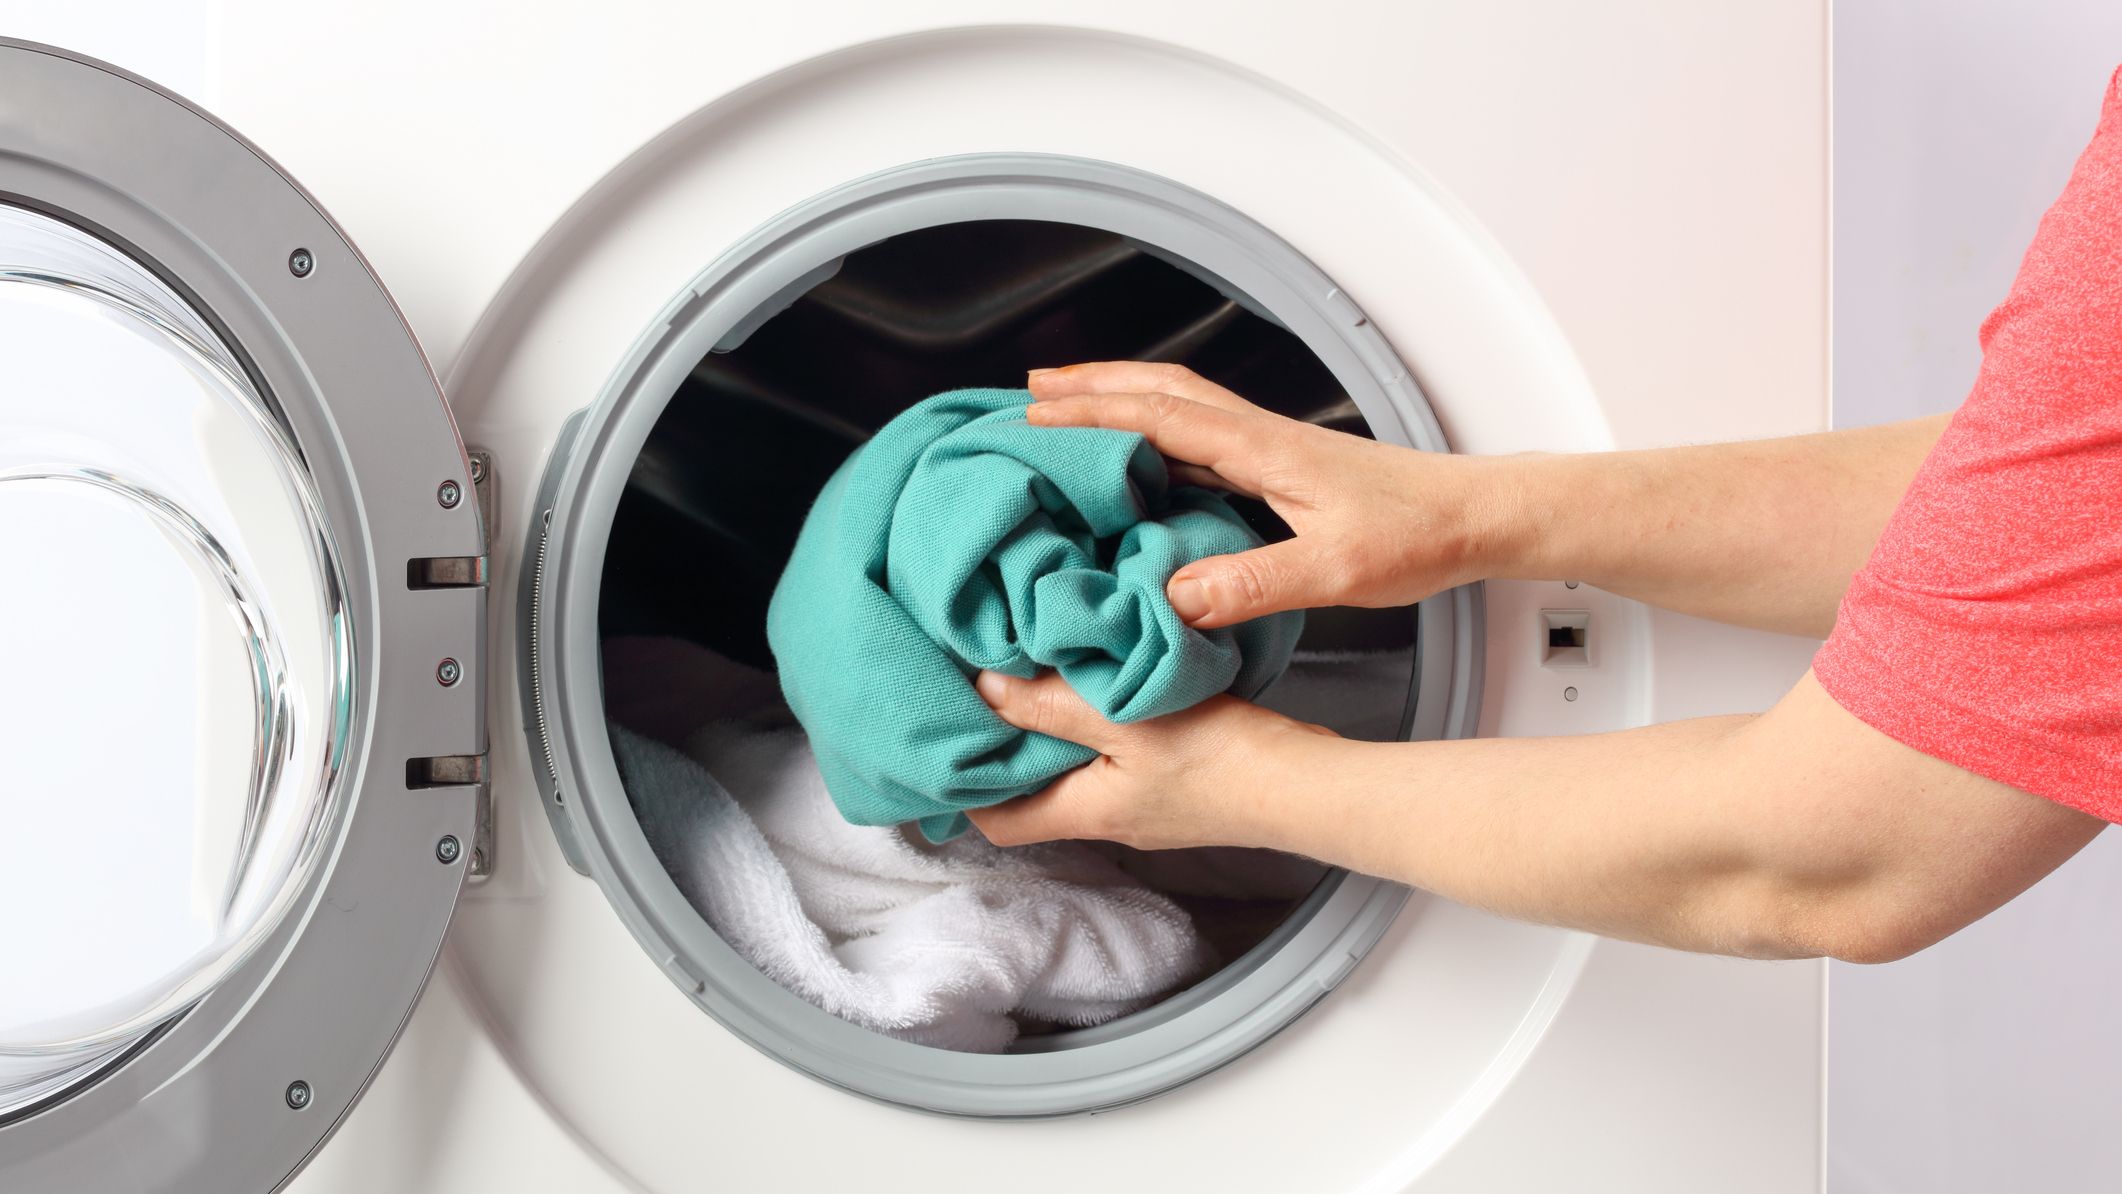 https://hips.hearstapps.com/hmg-prod/images/why-wash-a-washing-machine-1648481393.jpg?fill=16:9